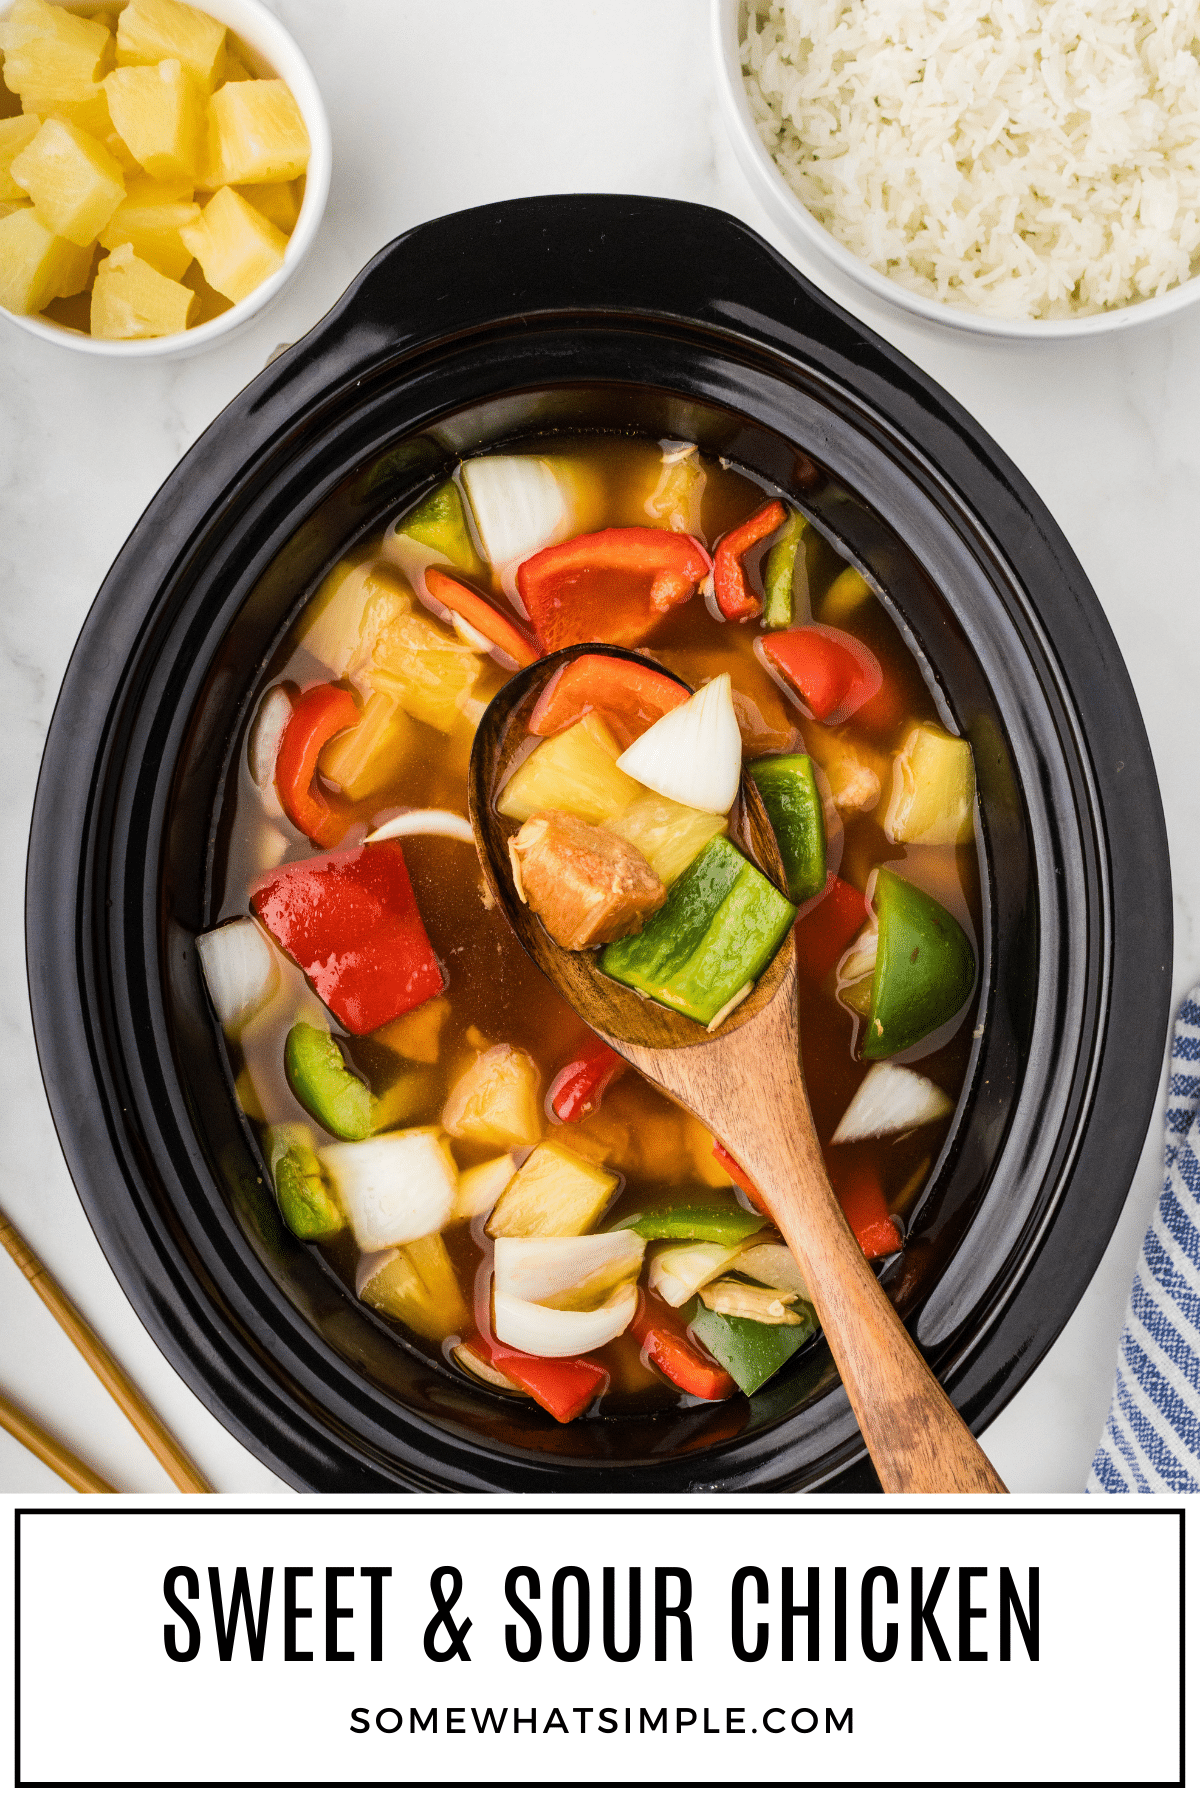 Crock Pot Sweet and Sour Chicken recipe will rival the flavor and freshness of your favorite takeout restaurant any day of the week! via @somewhatsimple